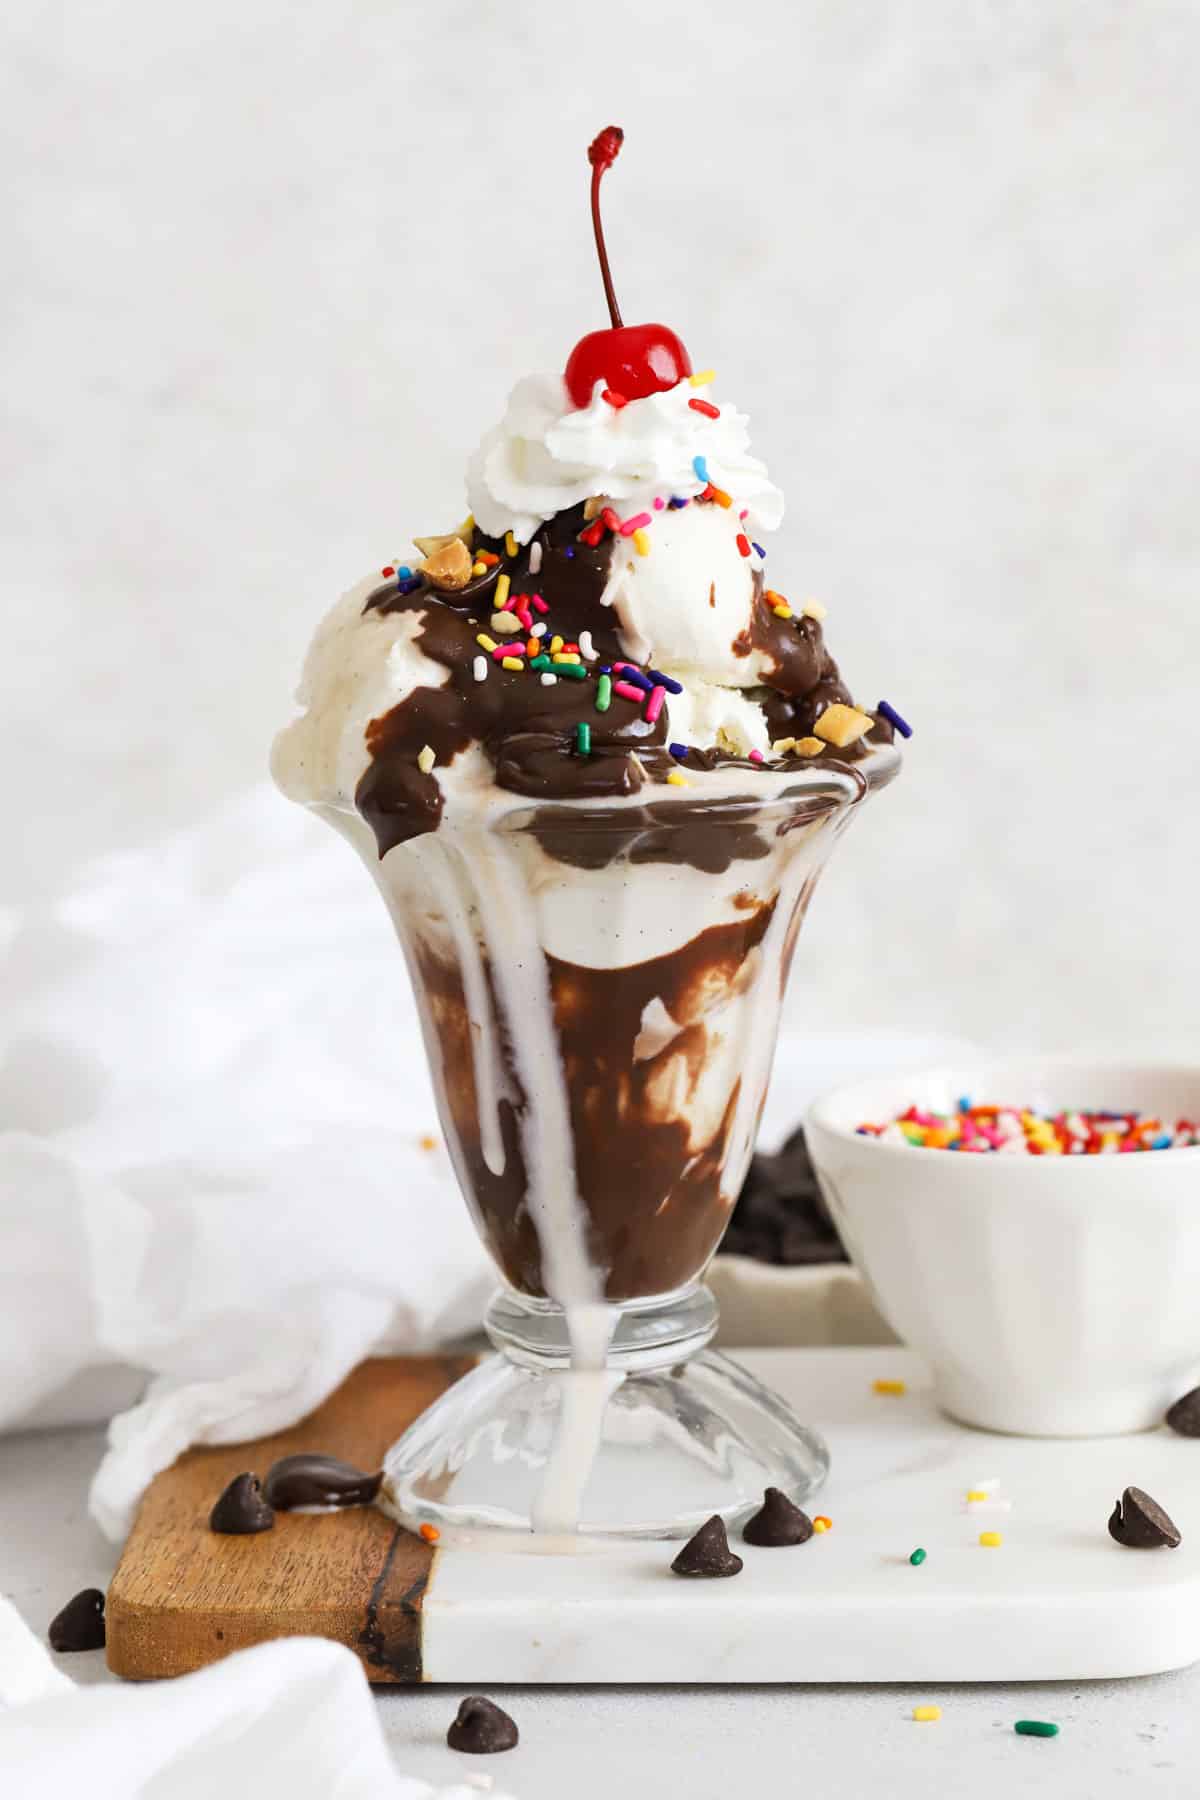 classic hot fudge sundae topped with whipped cream, sprinkles, nuts, and a maraschino cherry